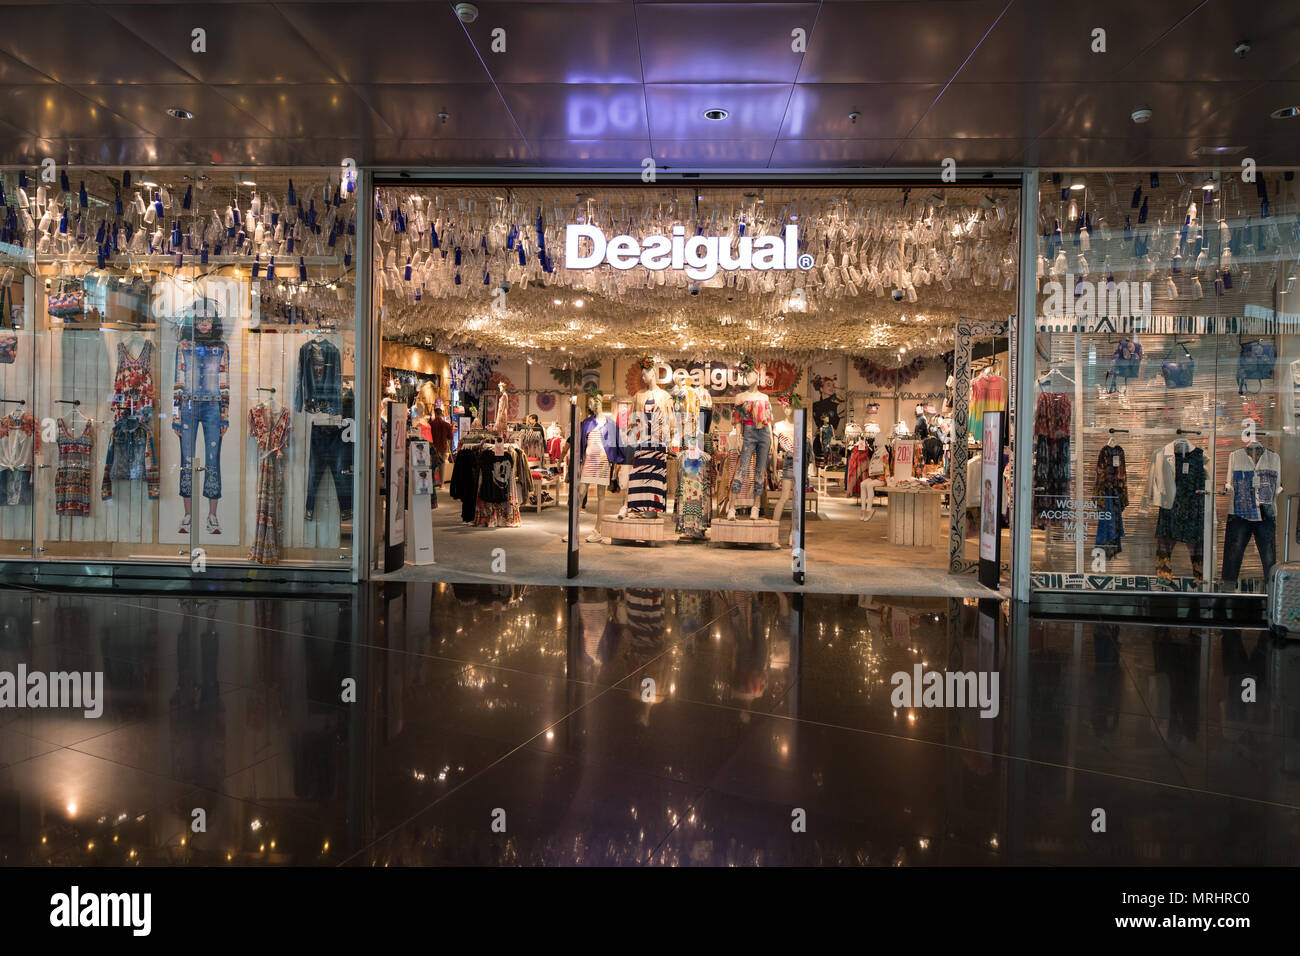 Desigual Spain High Resolution Stock Photography and Images - Alamy